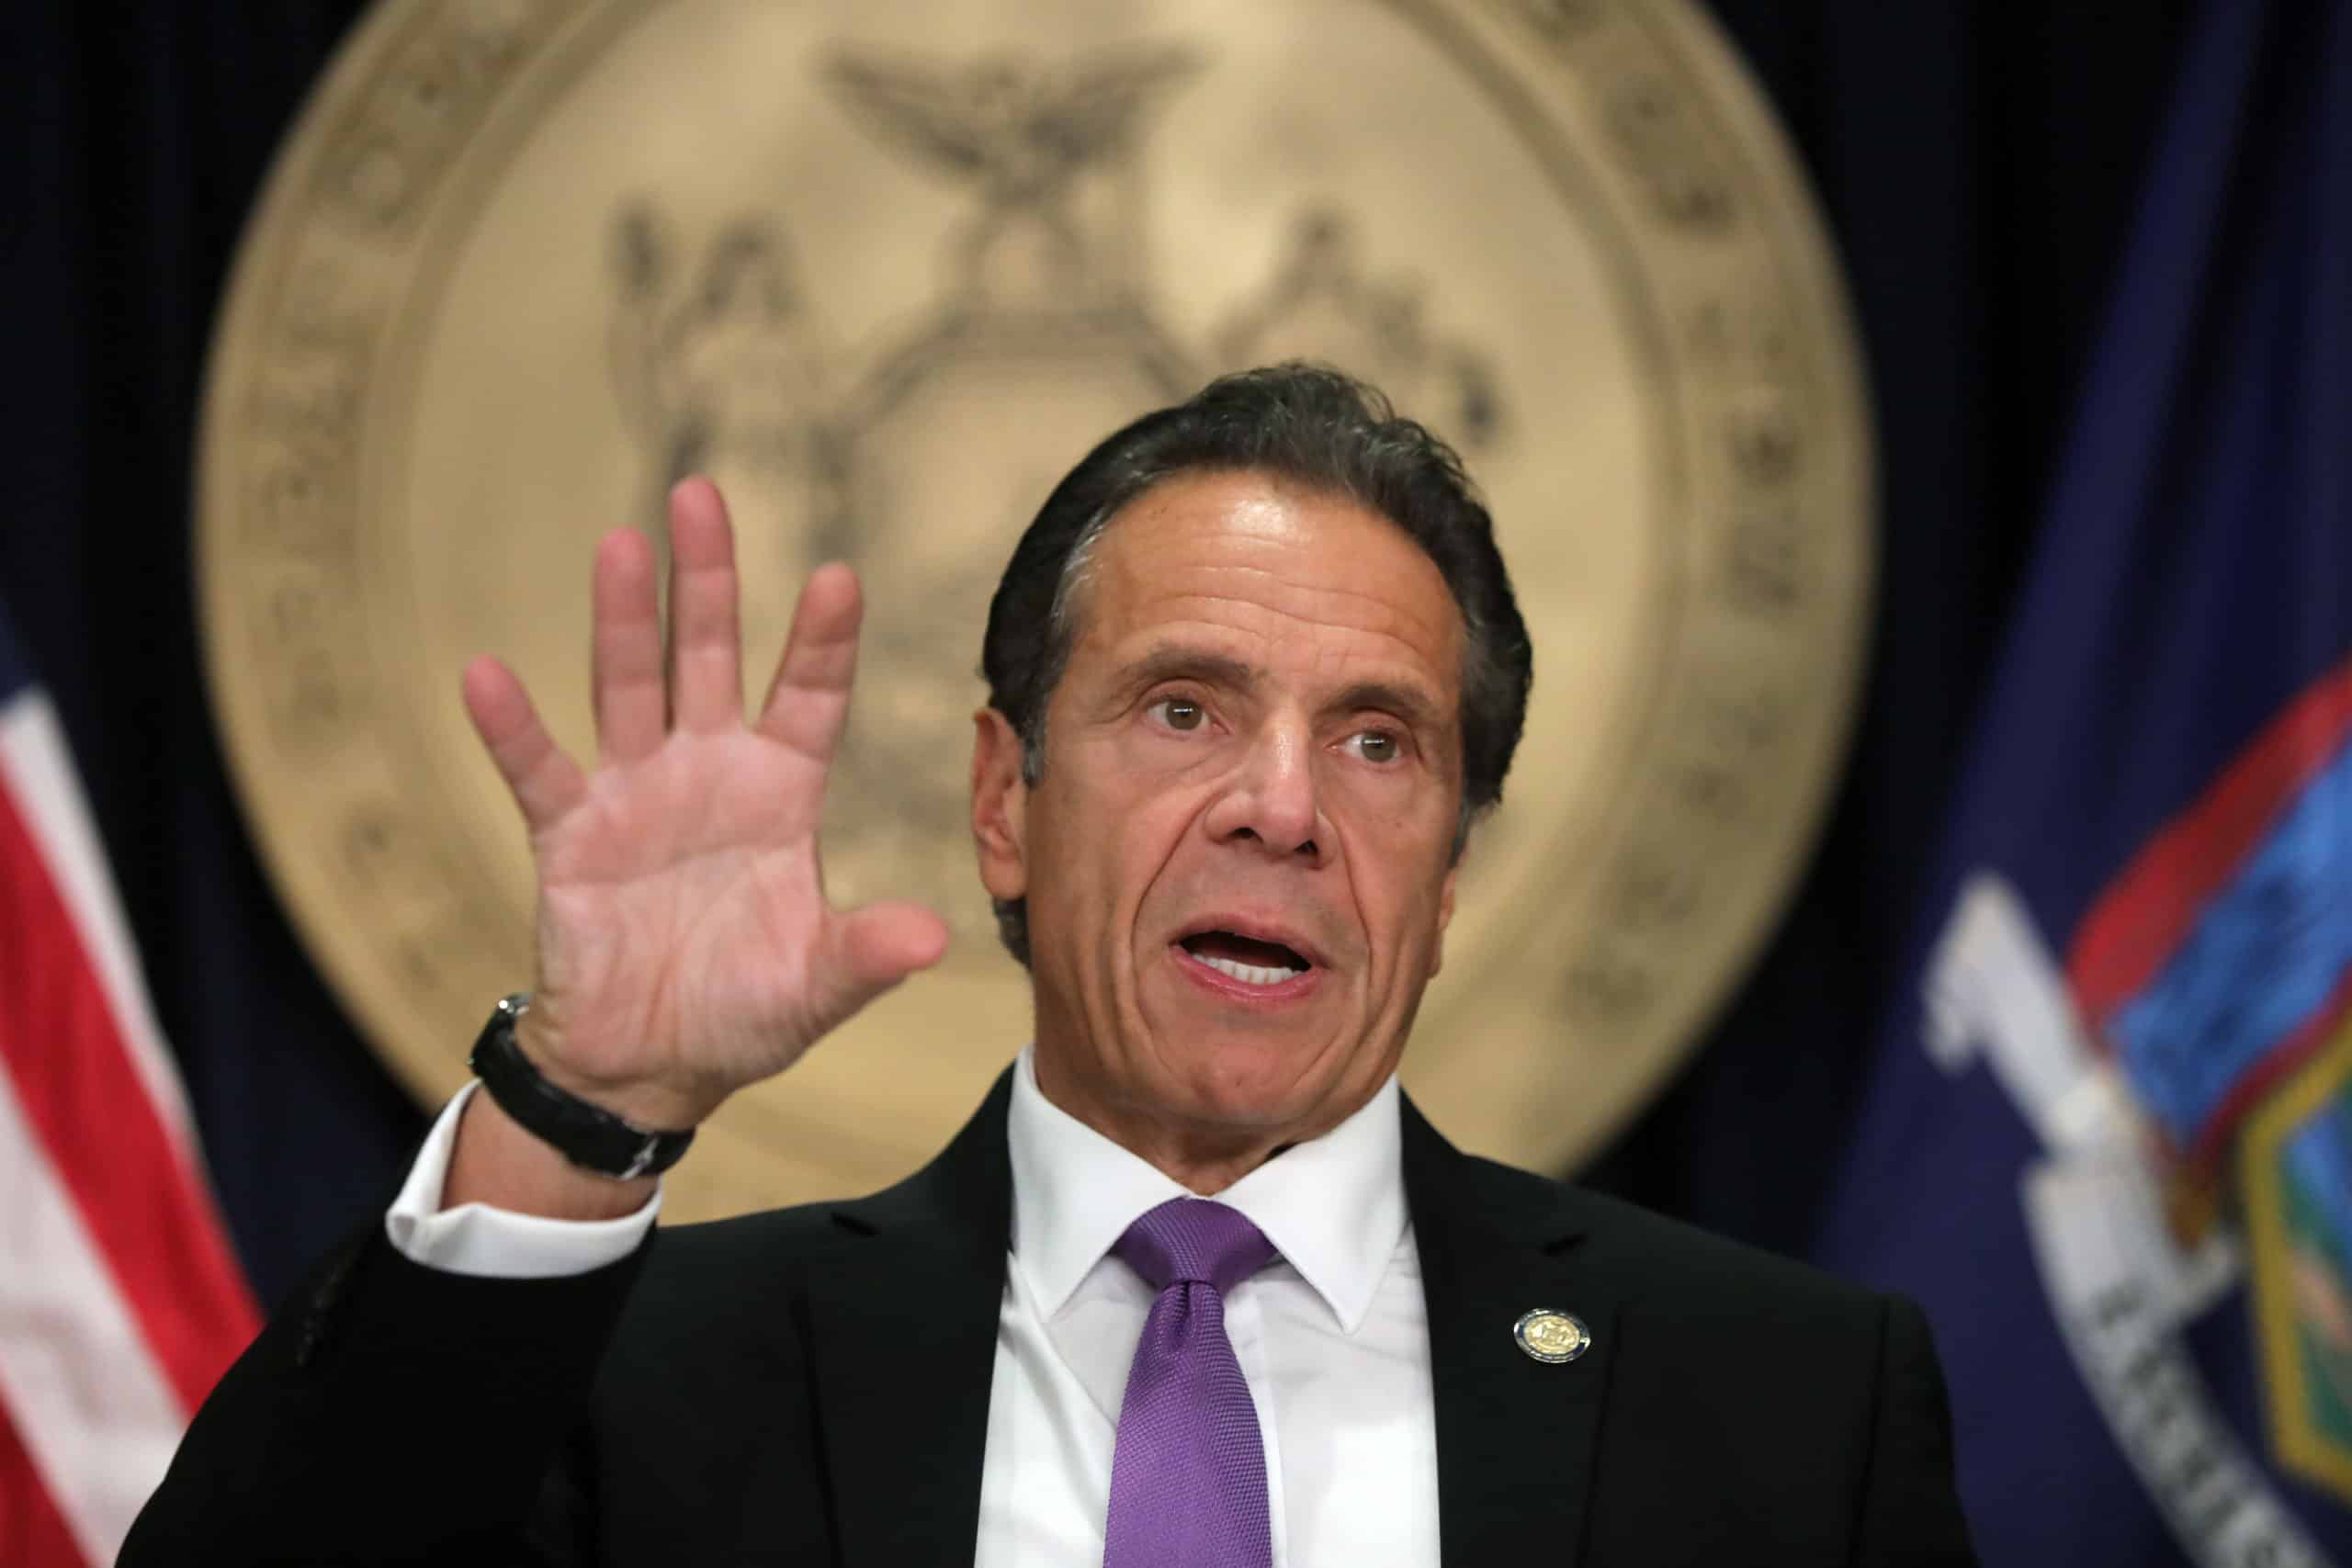 New York Governor Andrew Cuomo Accused Of Sexual Harassment By Former Aide